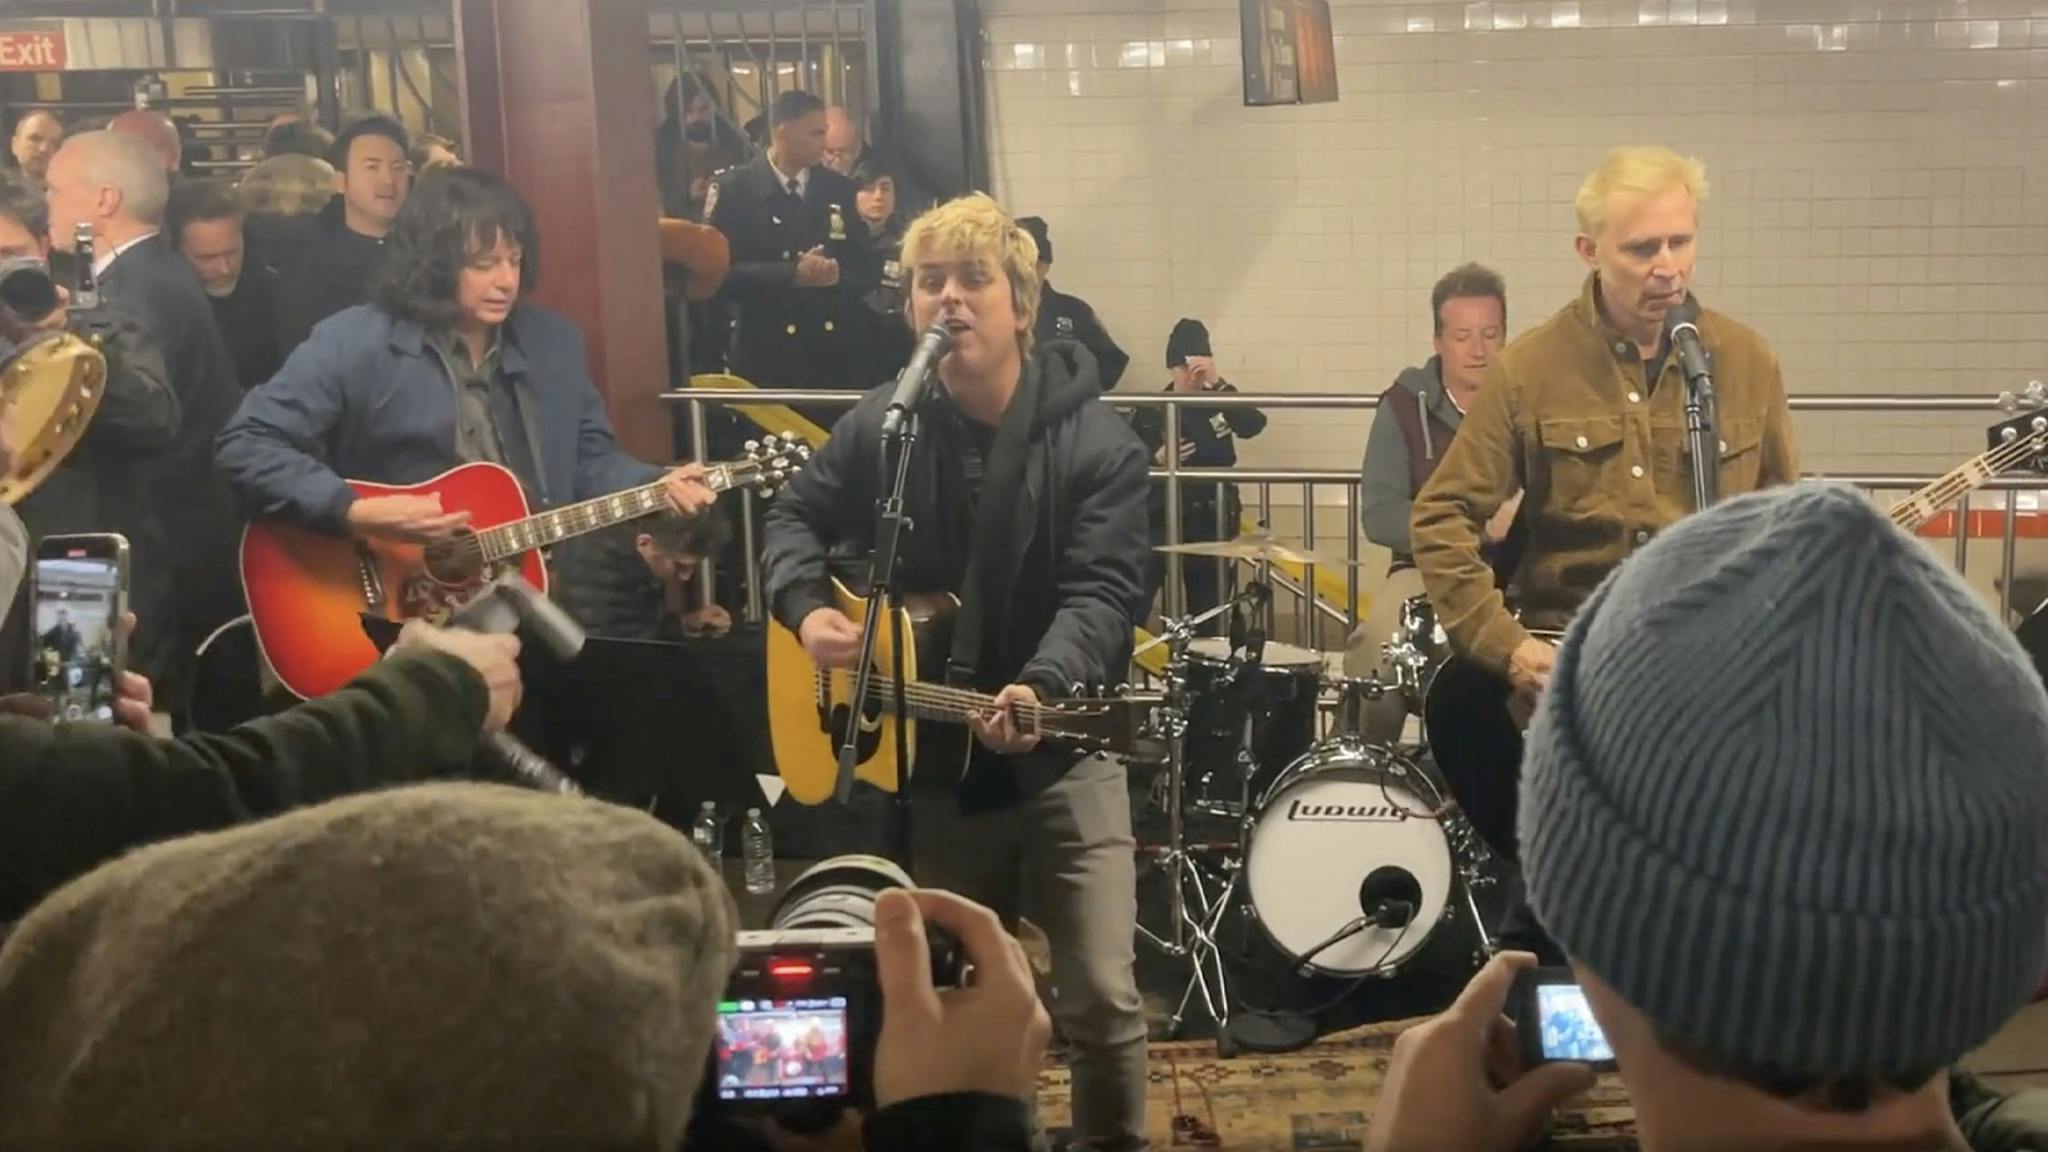 Green Day played a surprise set at a subway station in New York last night